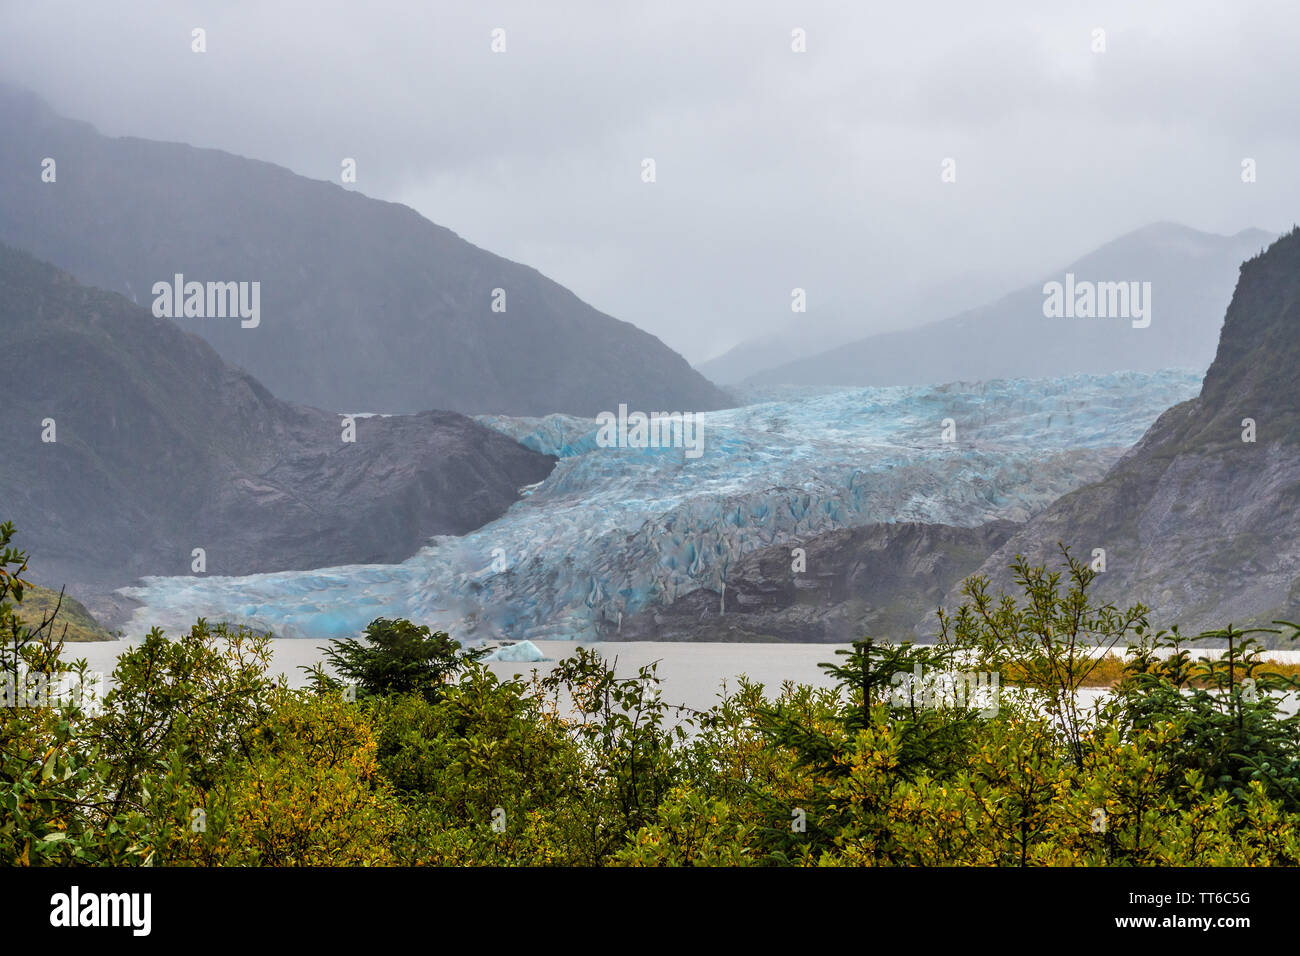 Mendenhall Glacier (Sitaantaagu), one of the most easily accessible Alaska glaciers, is a major glacier which flows from the Juneau Icefield. Stock Photo